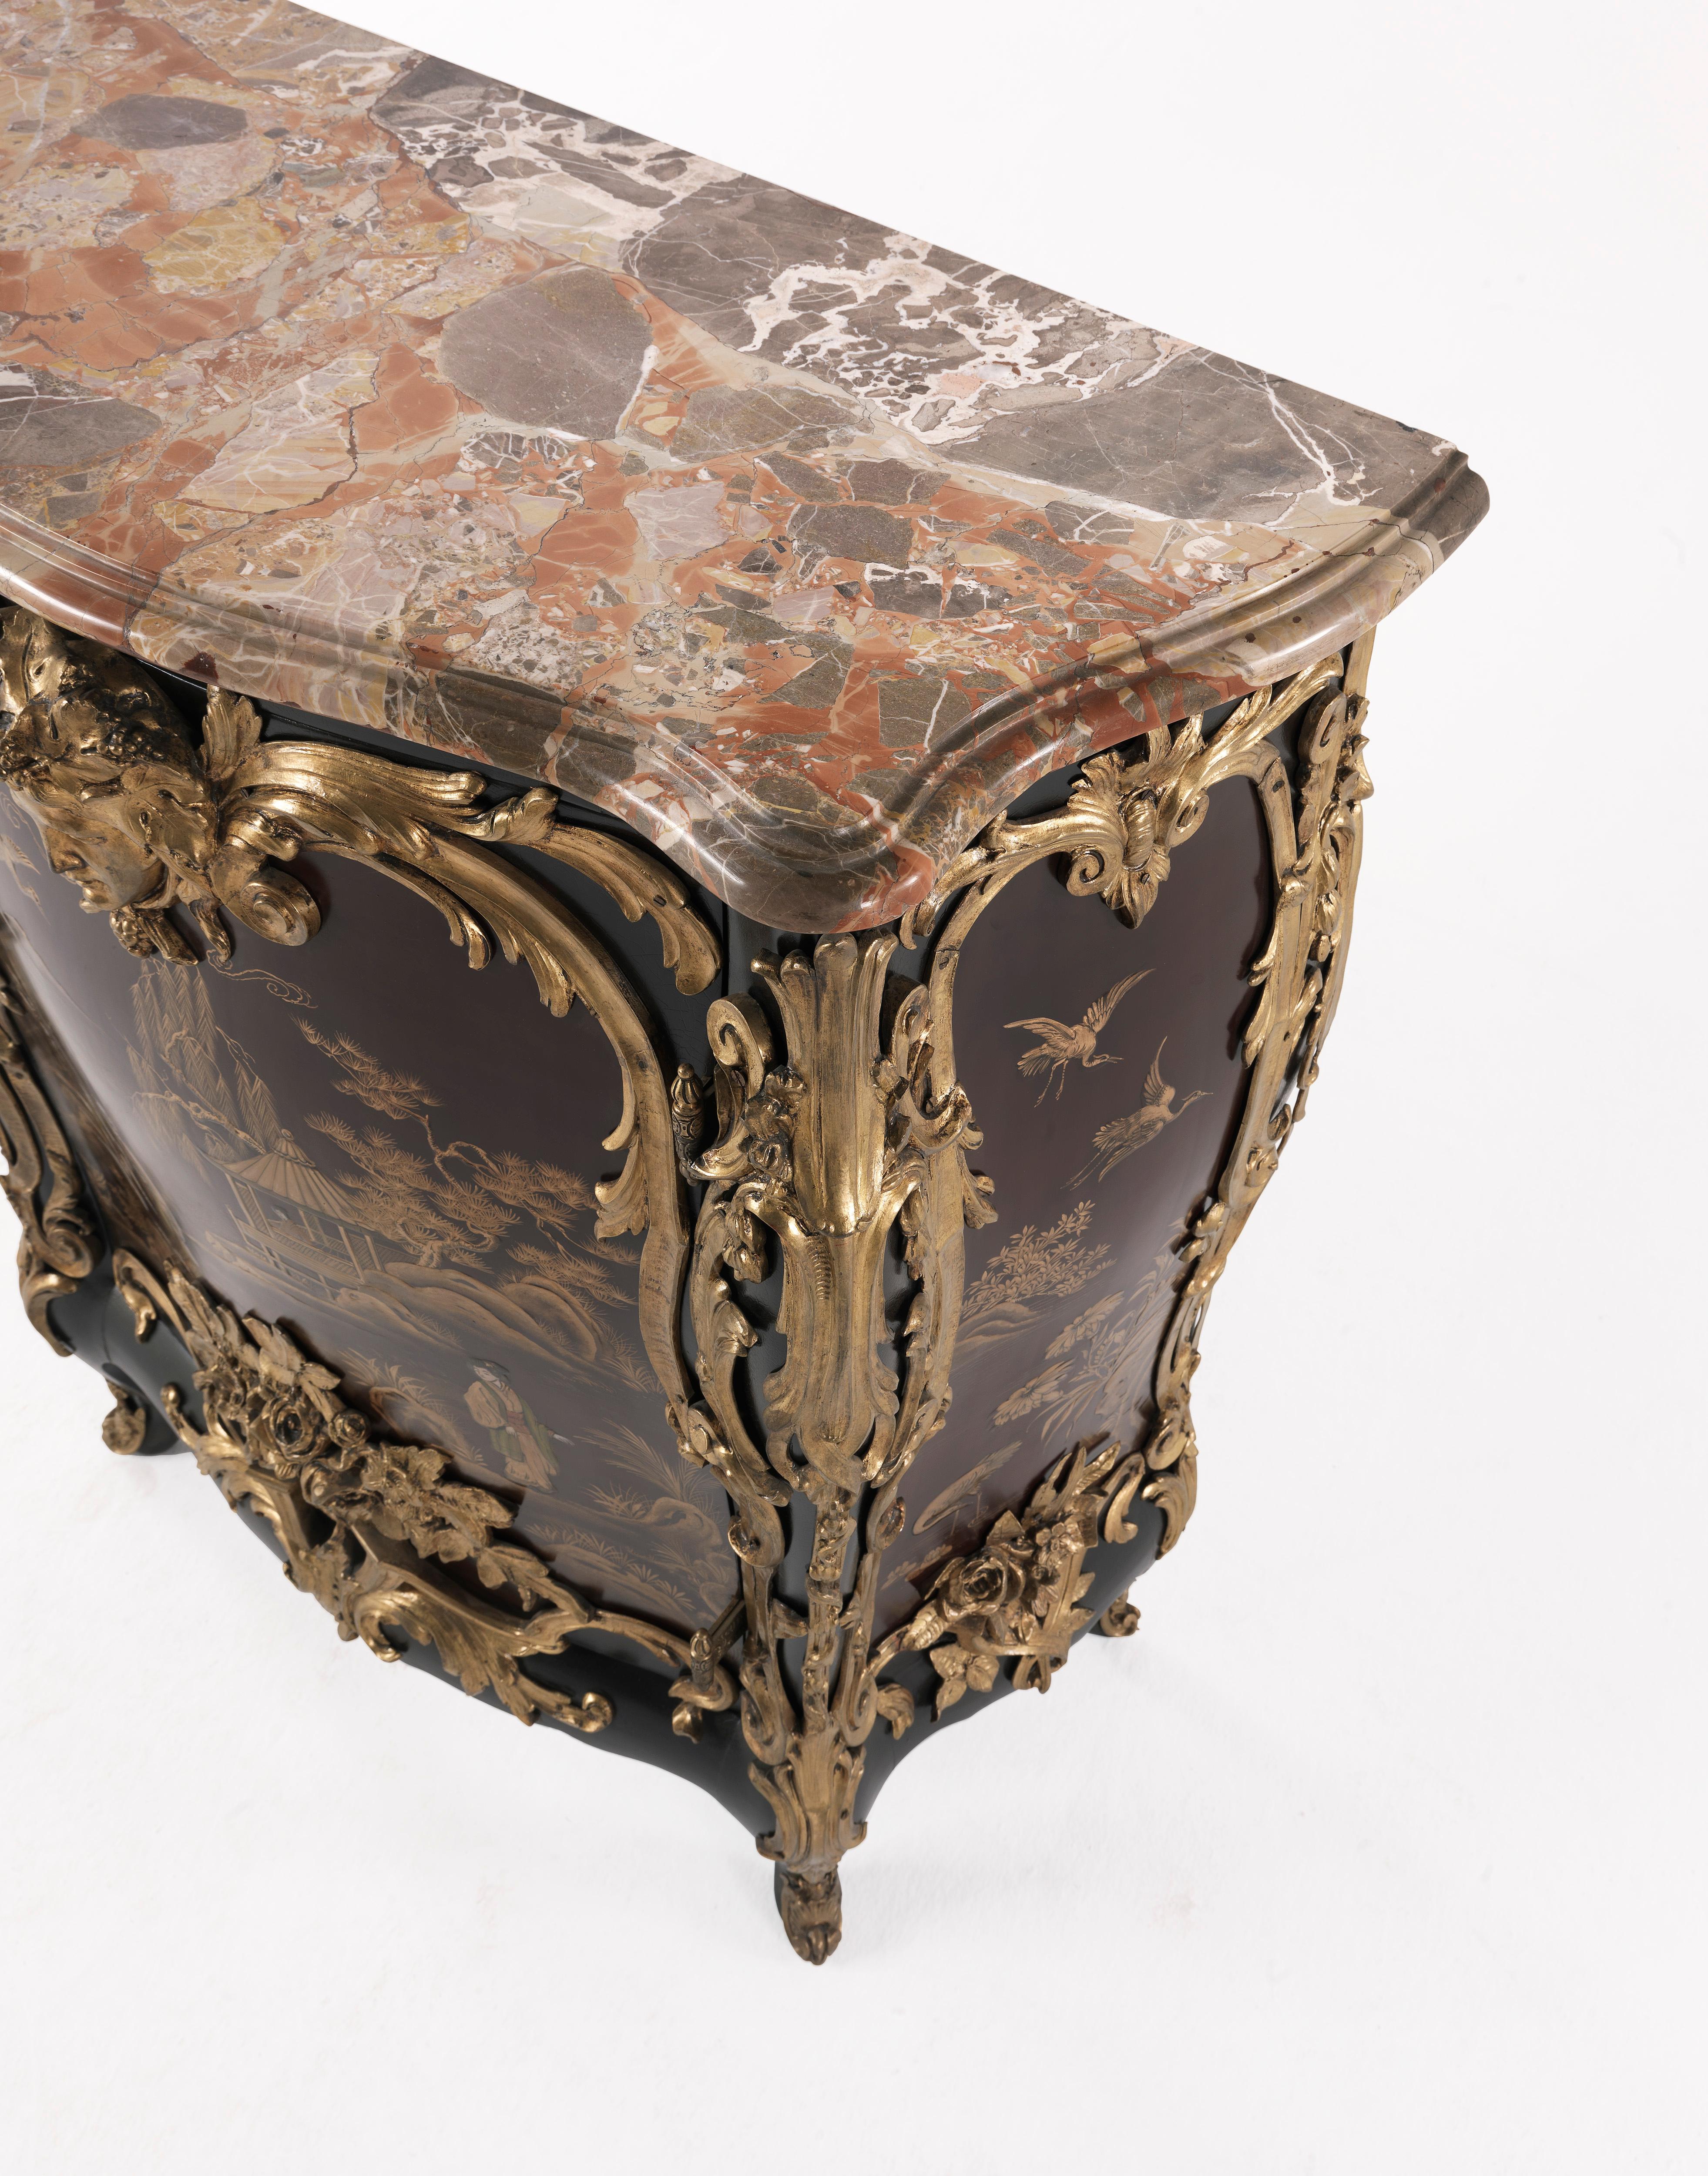 Jumbo Collection Antique Italian Ormolu-Mounted and Lacquered Cabinet In Good Condition For Sale In Cantù, Lombardia